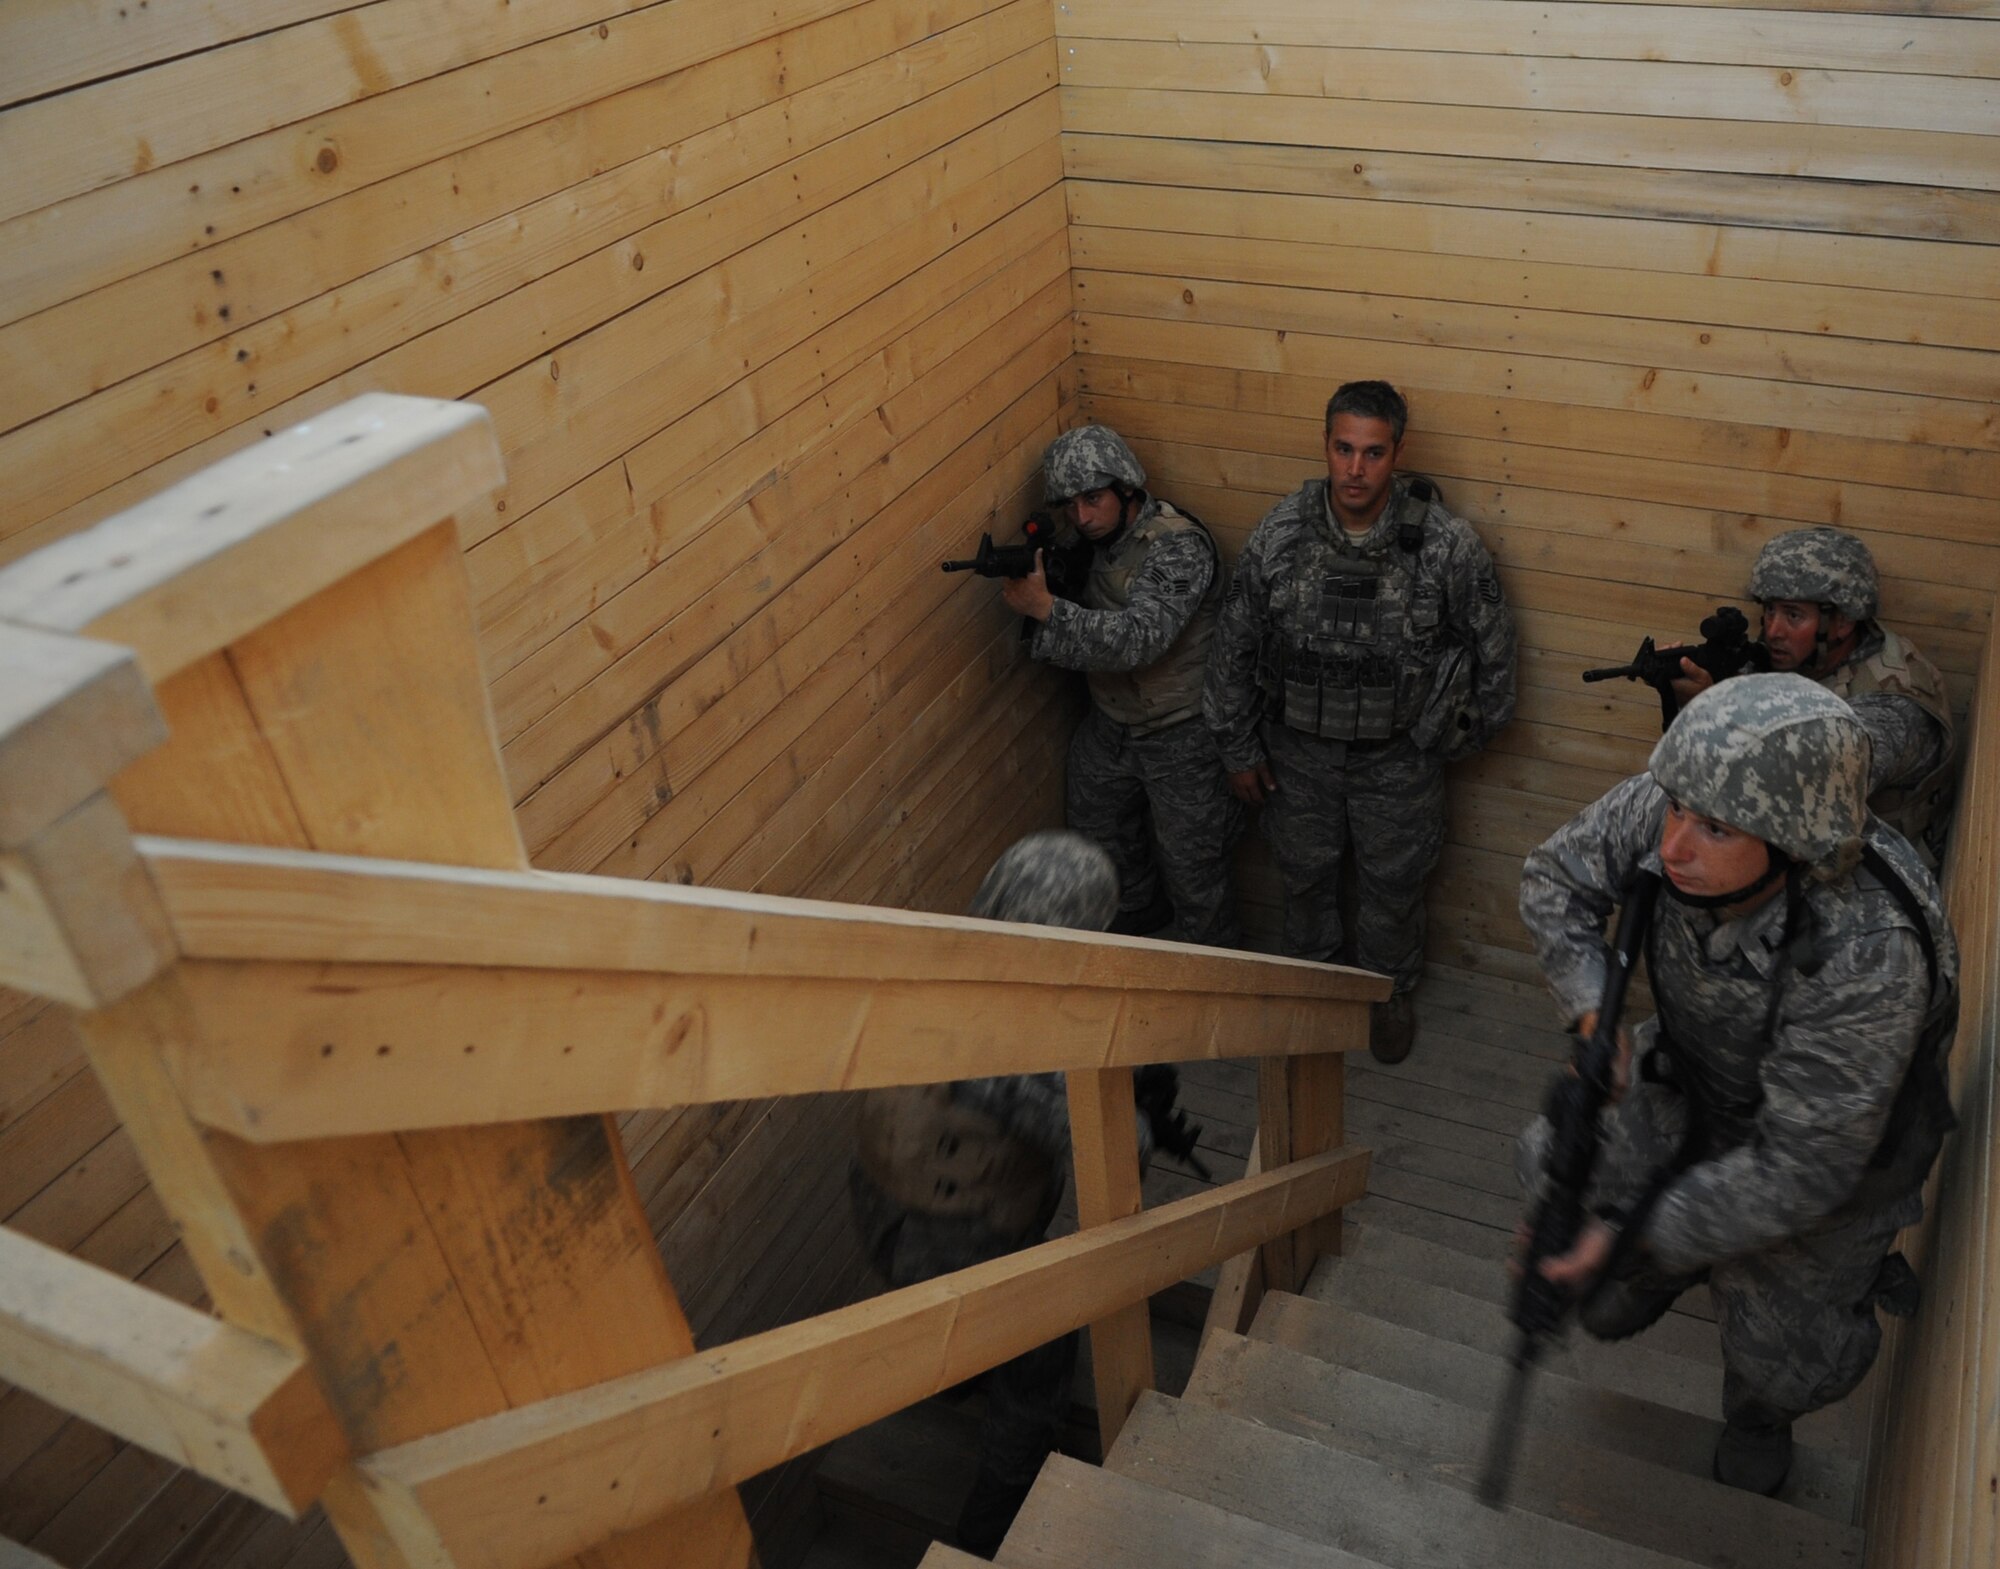 U.S. Air Force Tech. Sgt. Shawn Leonard, 9th Air Support Operations Squadron joint terminal attack controller instructor, Fort Hood, Texas, observes Airmen clear a stairwell in urban close combat training class during exercise ALLIED STRIKE 10, Grafenwoehr, Germany, July 26, 2010. AS 10 is Europe's premier close air support (CAS) exercise, held annually to conduct robust, realistic CAS training that helps build partnership capacity among allied North Atlantic Treaty Organization nations and joint services while refining the latest operational CAS tactics. For more ALLIED STRIKE information go to www.usafe.af.mil/alliedstrike.asp. (U.S. Air Force photo by Senior Airman Caleb Pierce)